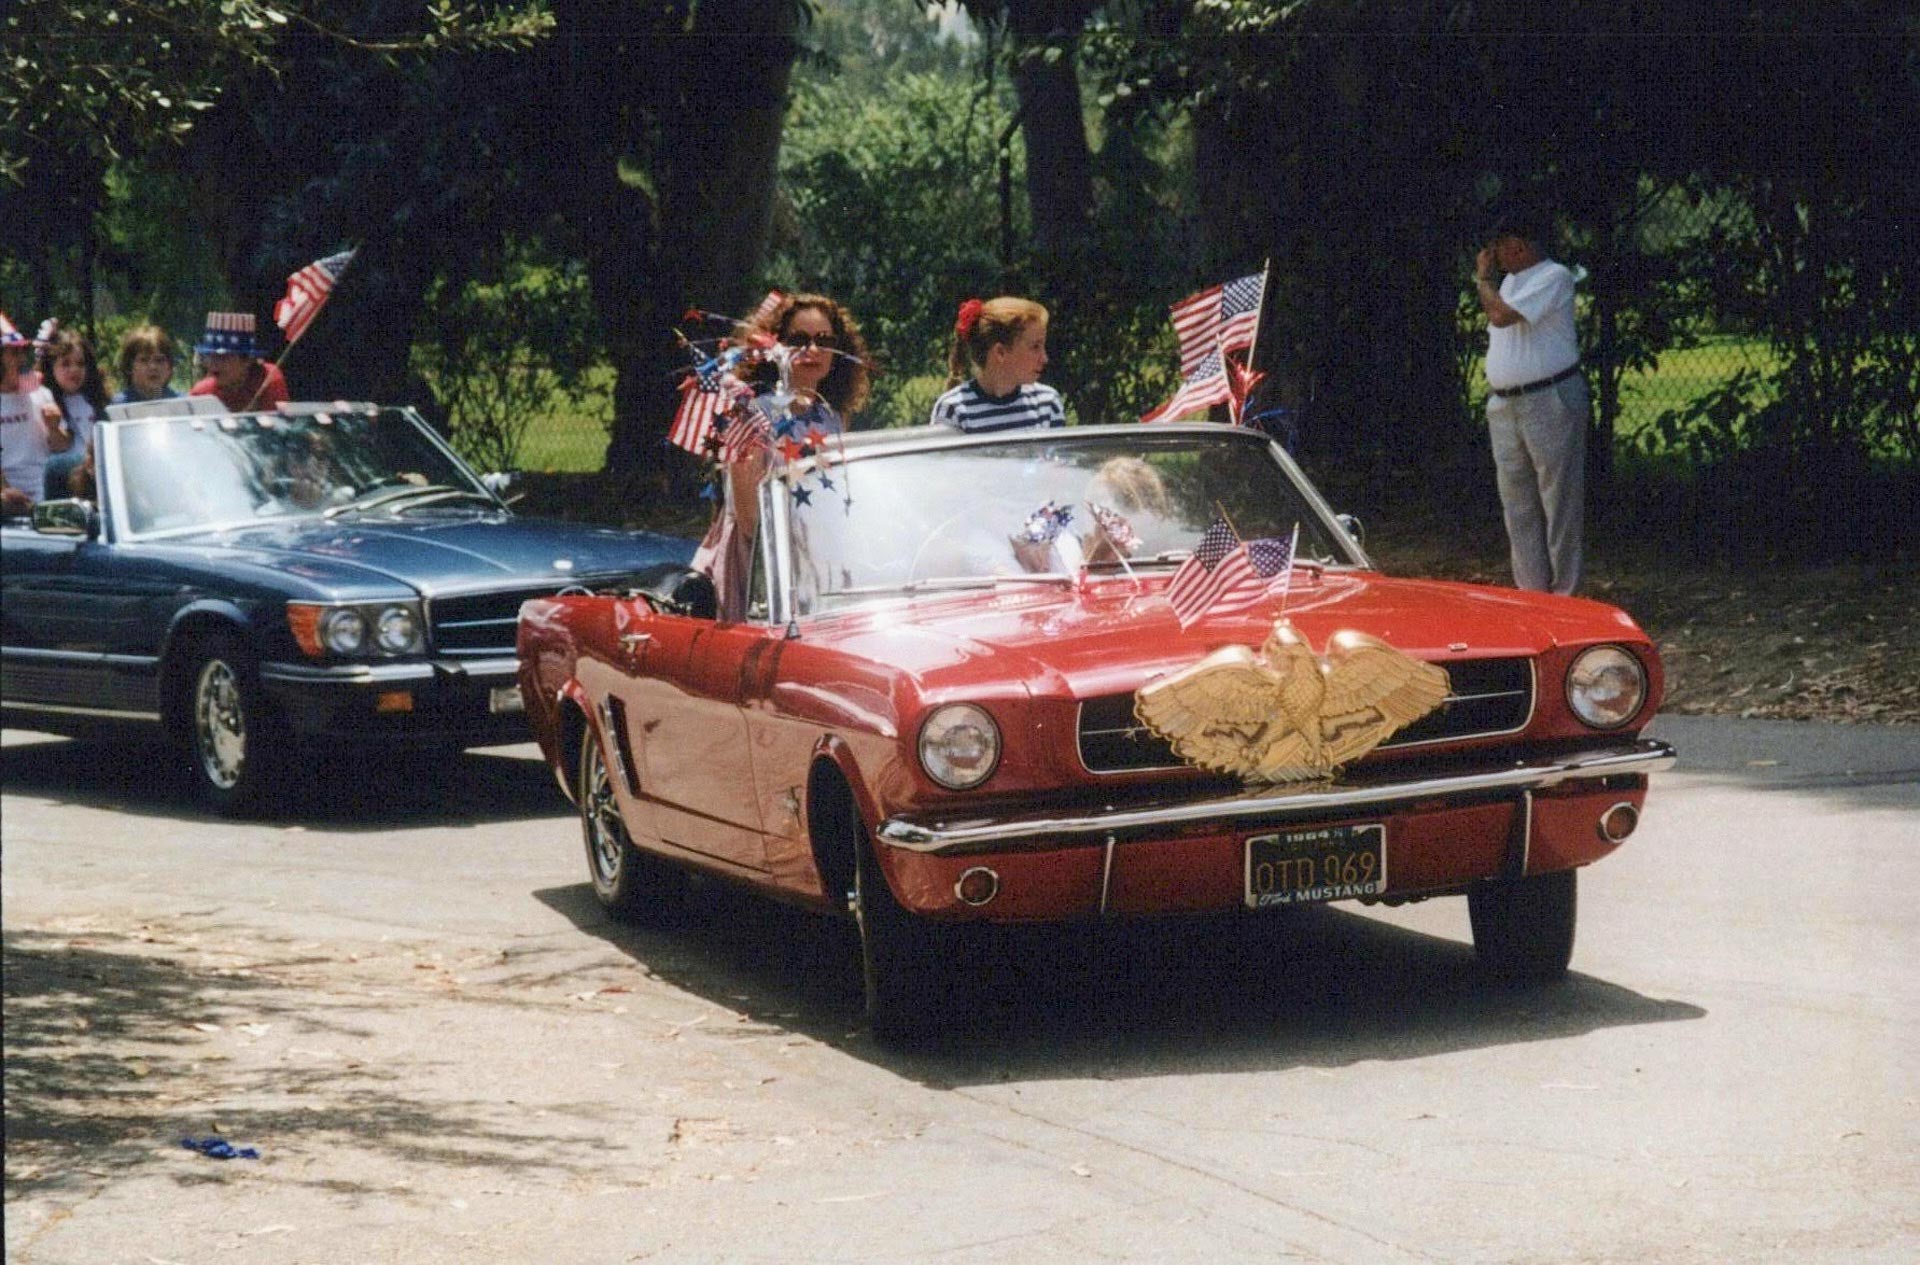 history-from-our-readers-2-toluca-lake-fourth-of-july-parade-1998-3